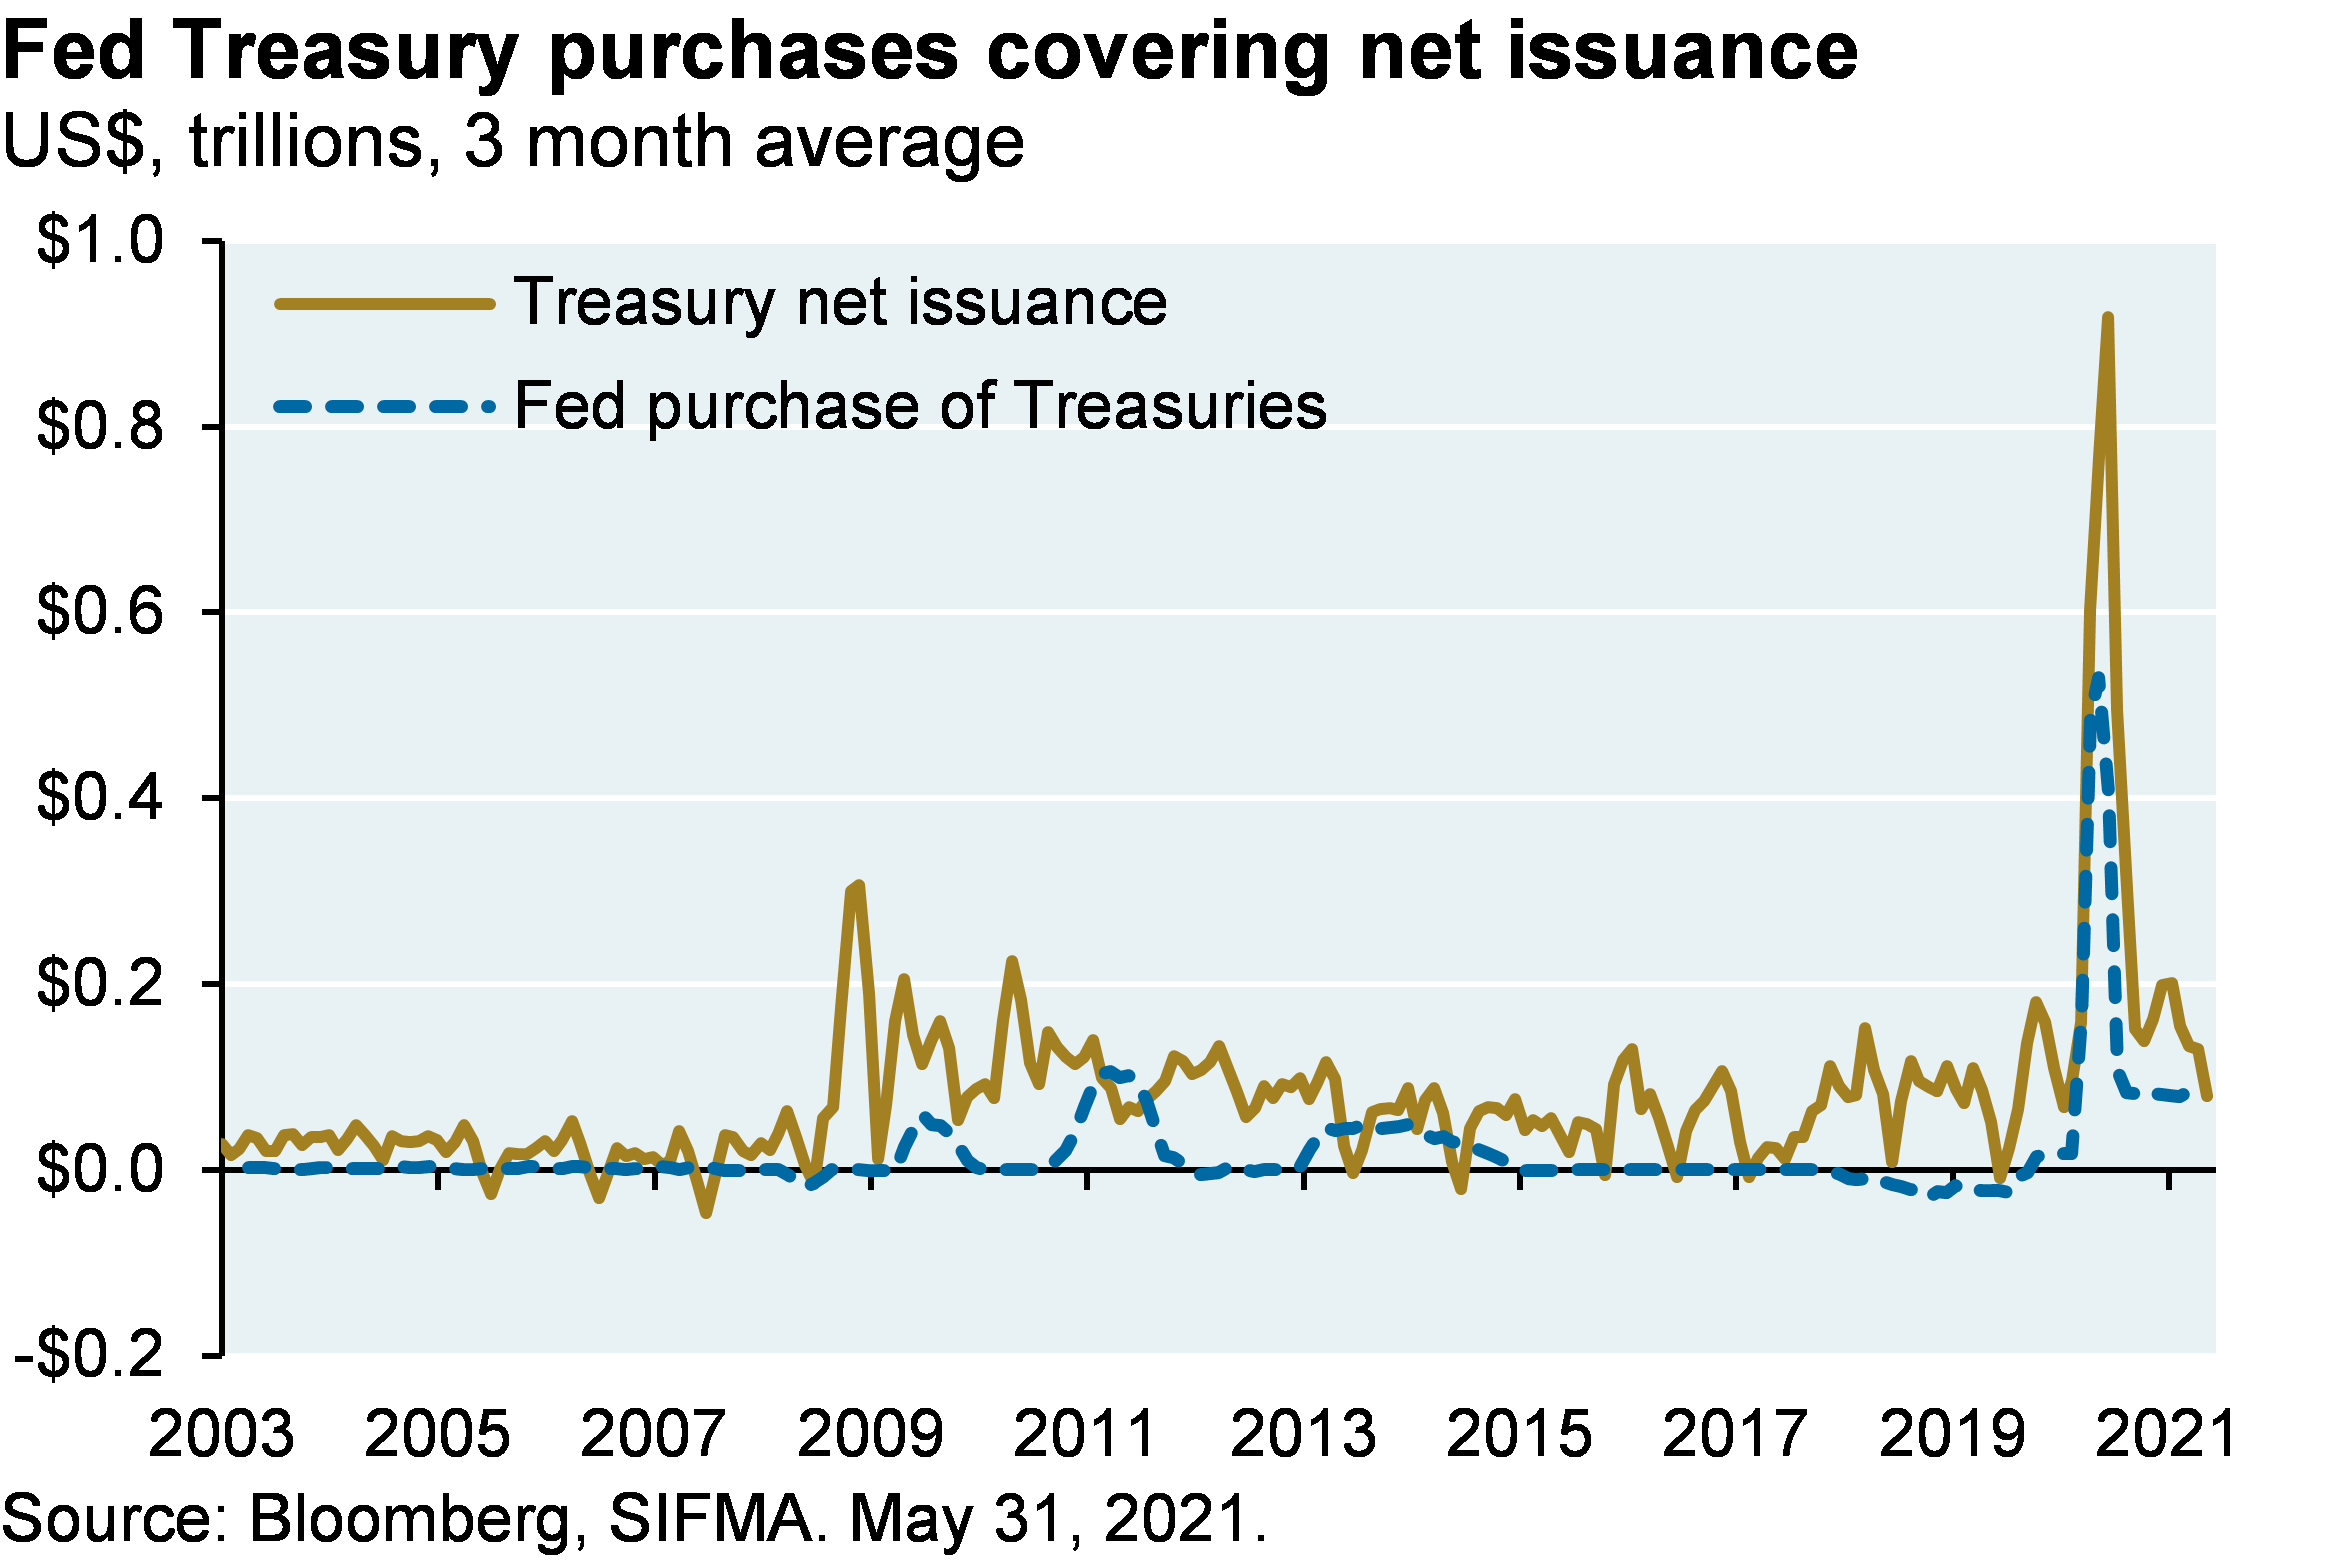 Fed Treasury purchases covering net issuance